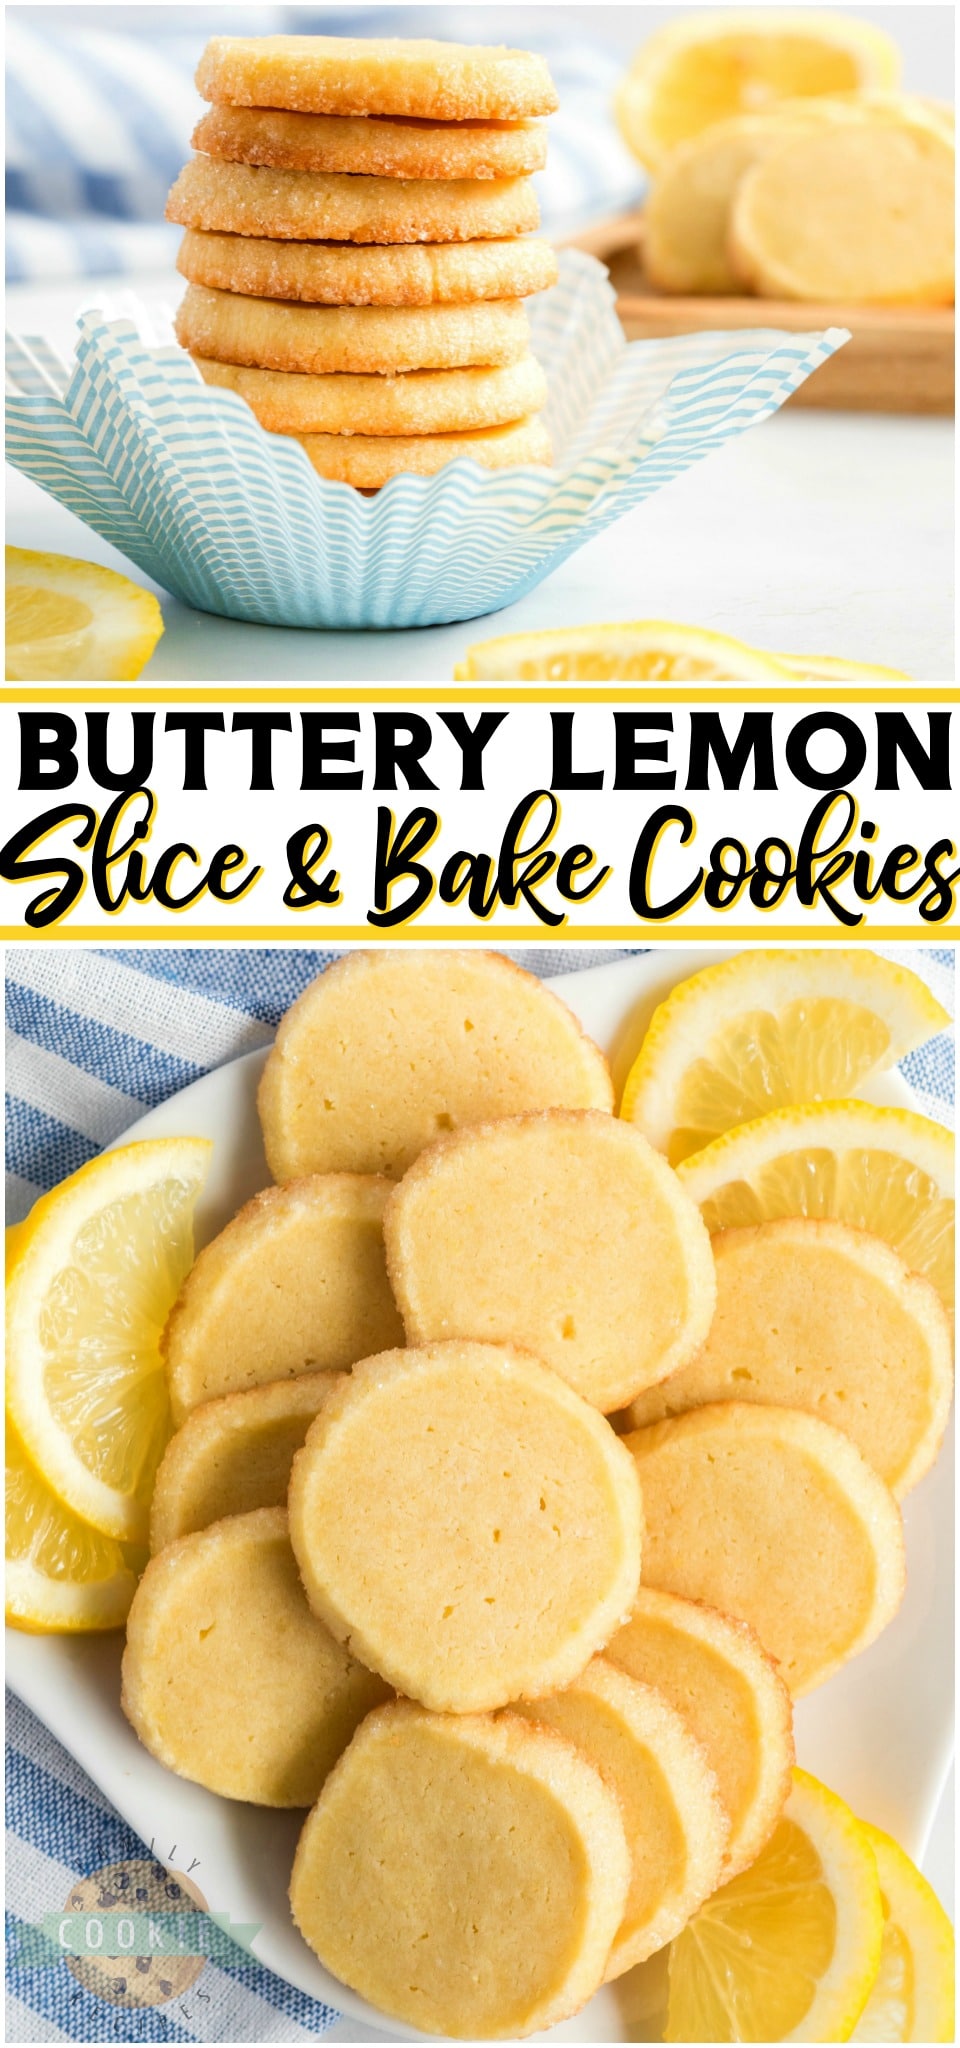 Lemon slice and bake cookies are a simply, buttery cookie recipe with lovely lemon flavor. Easy to make ahead, these lemon shortbread cookies are perfect for parties & as gifts! 